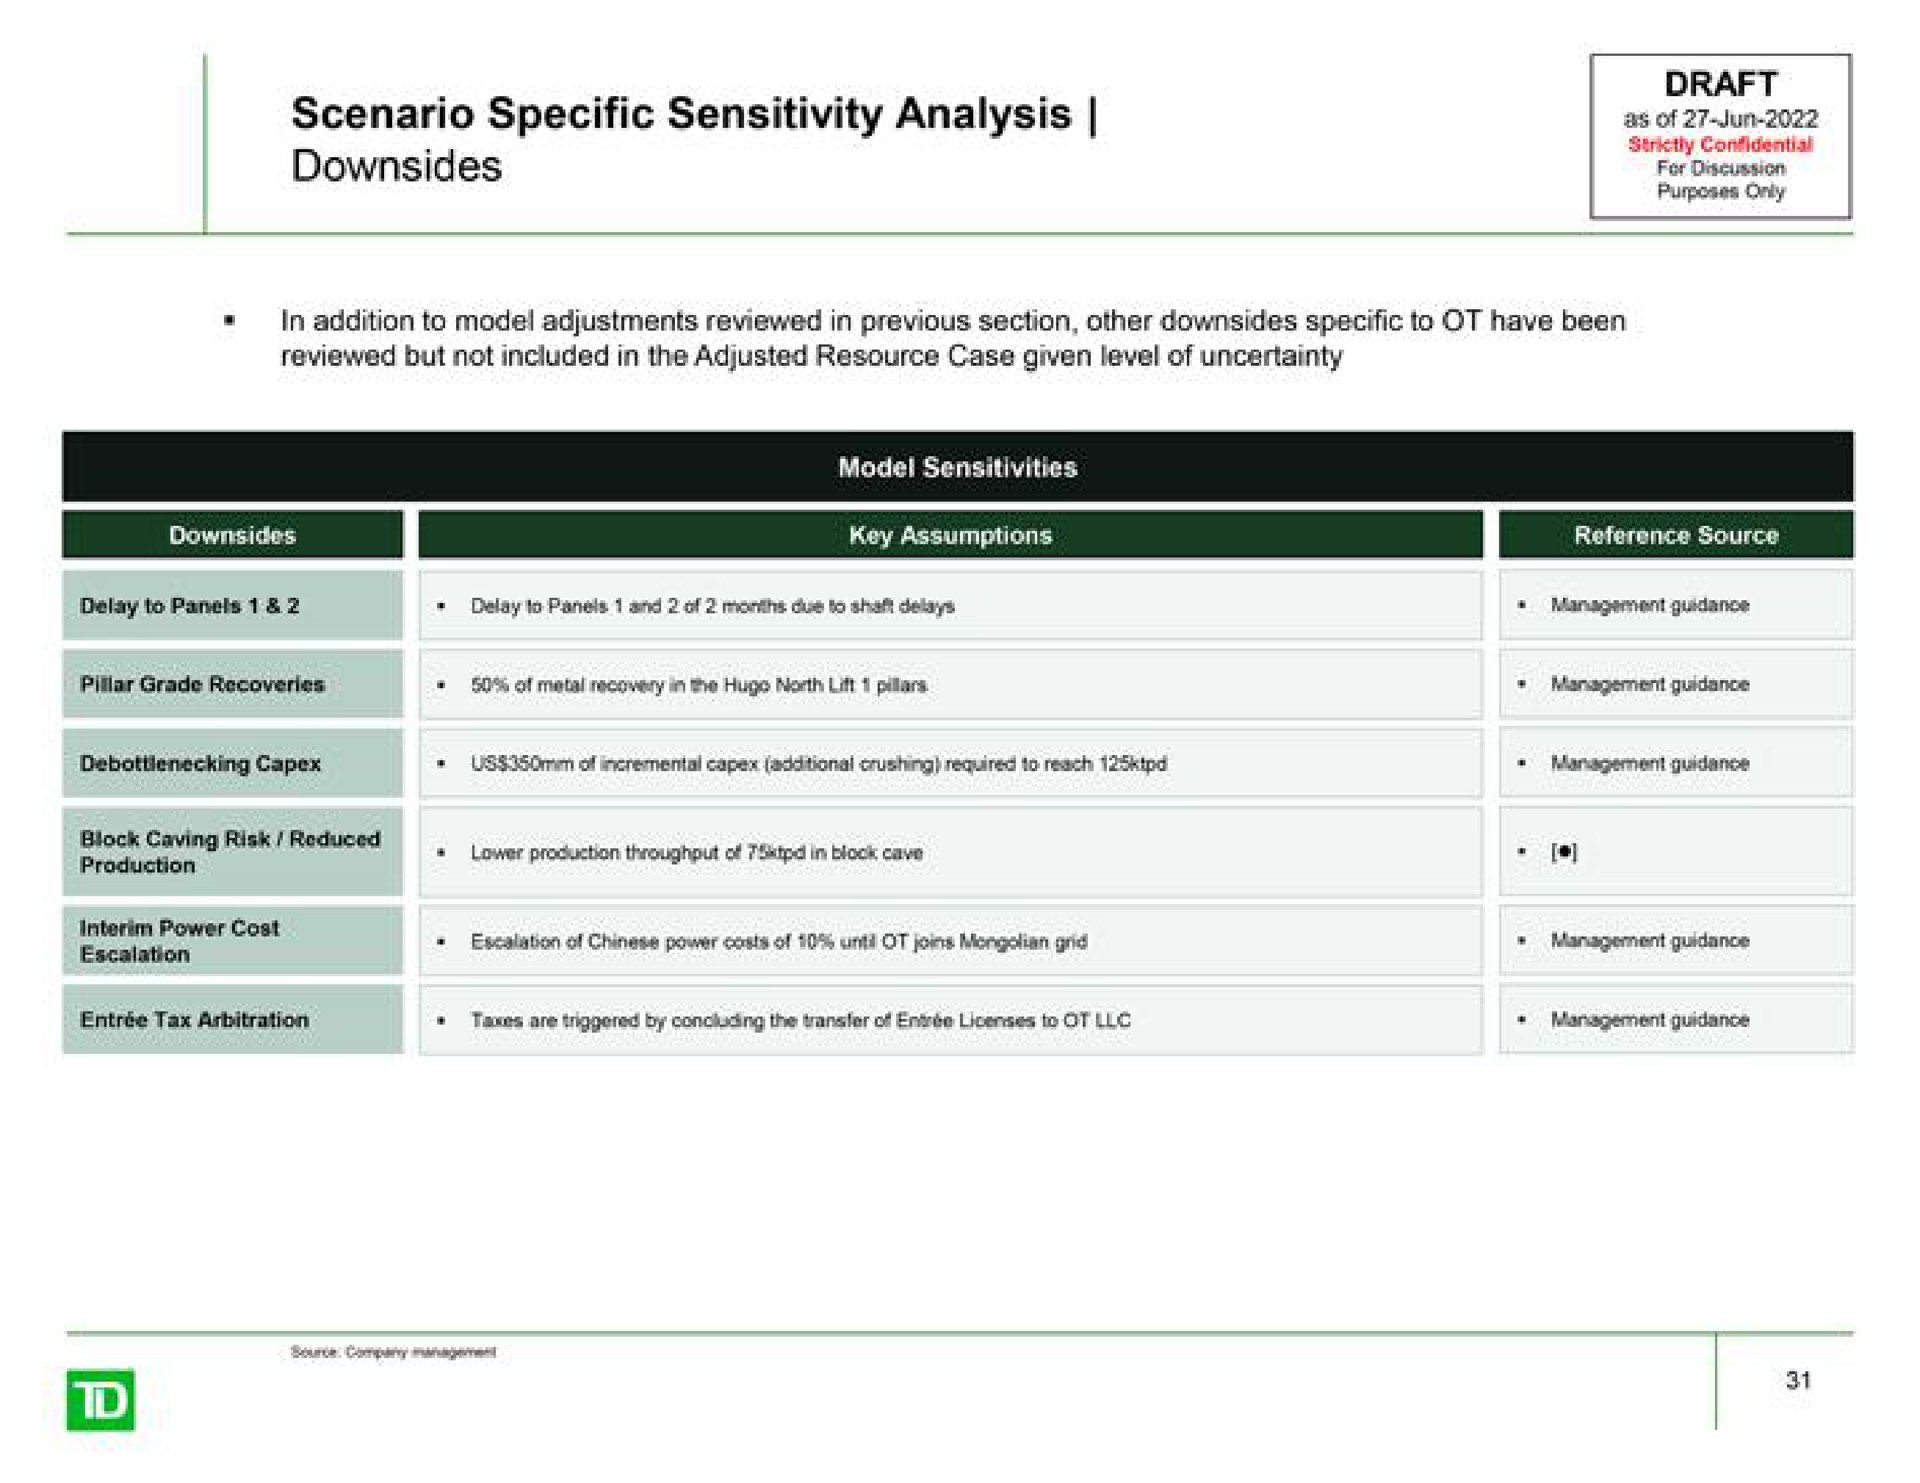 scenario specific sensitivity analysis downsides draft as of for discussion | TD Securities